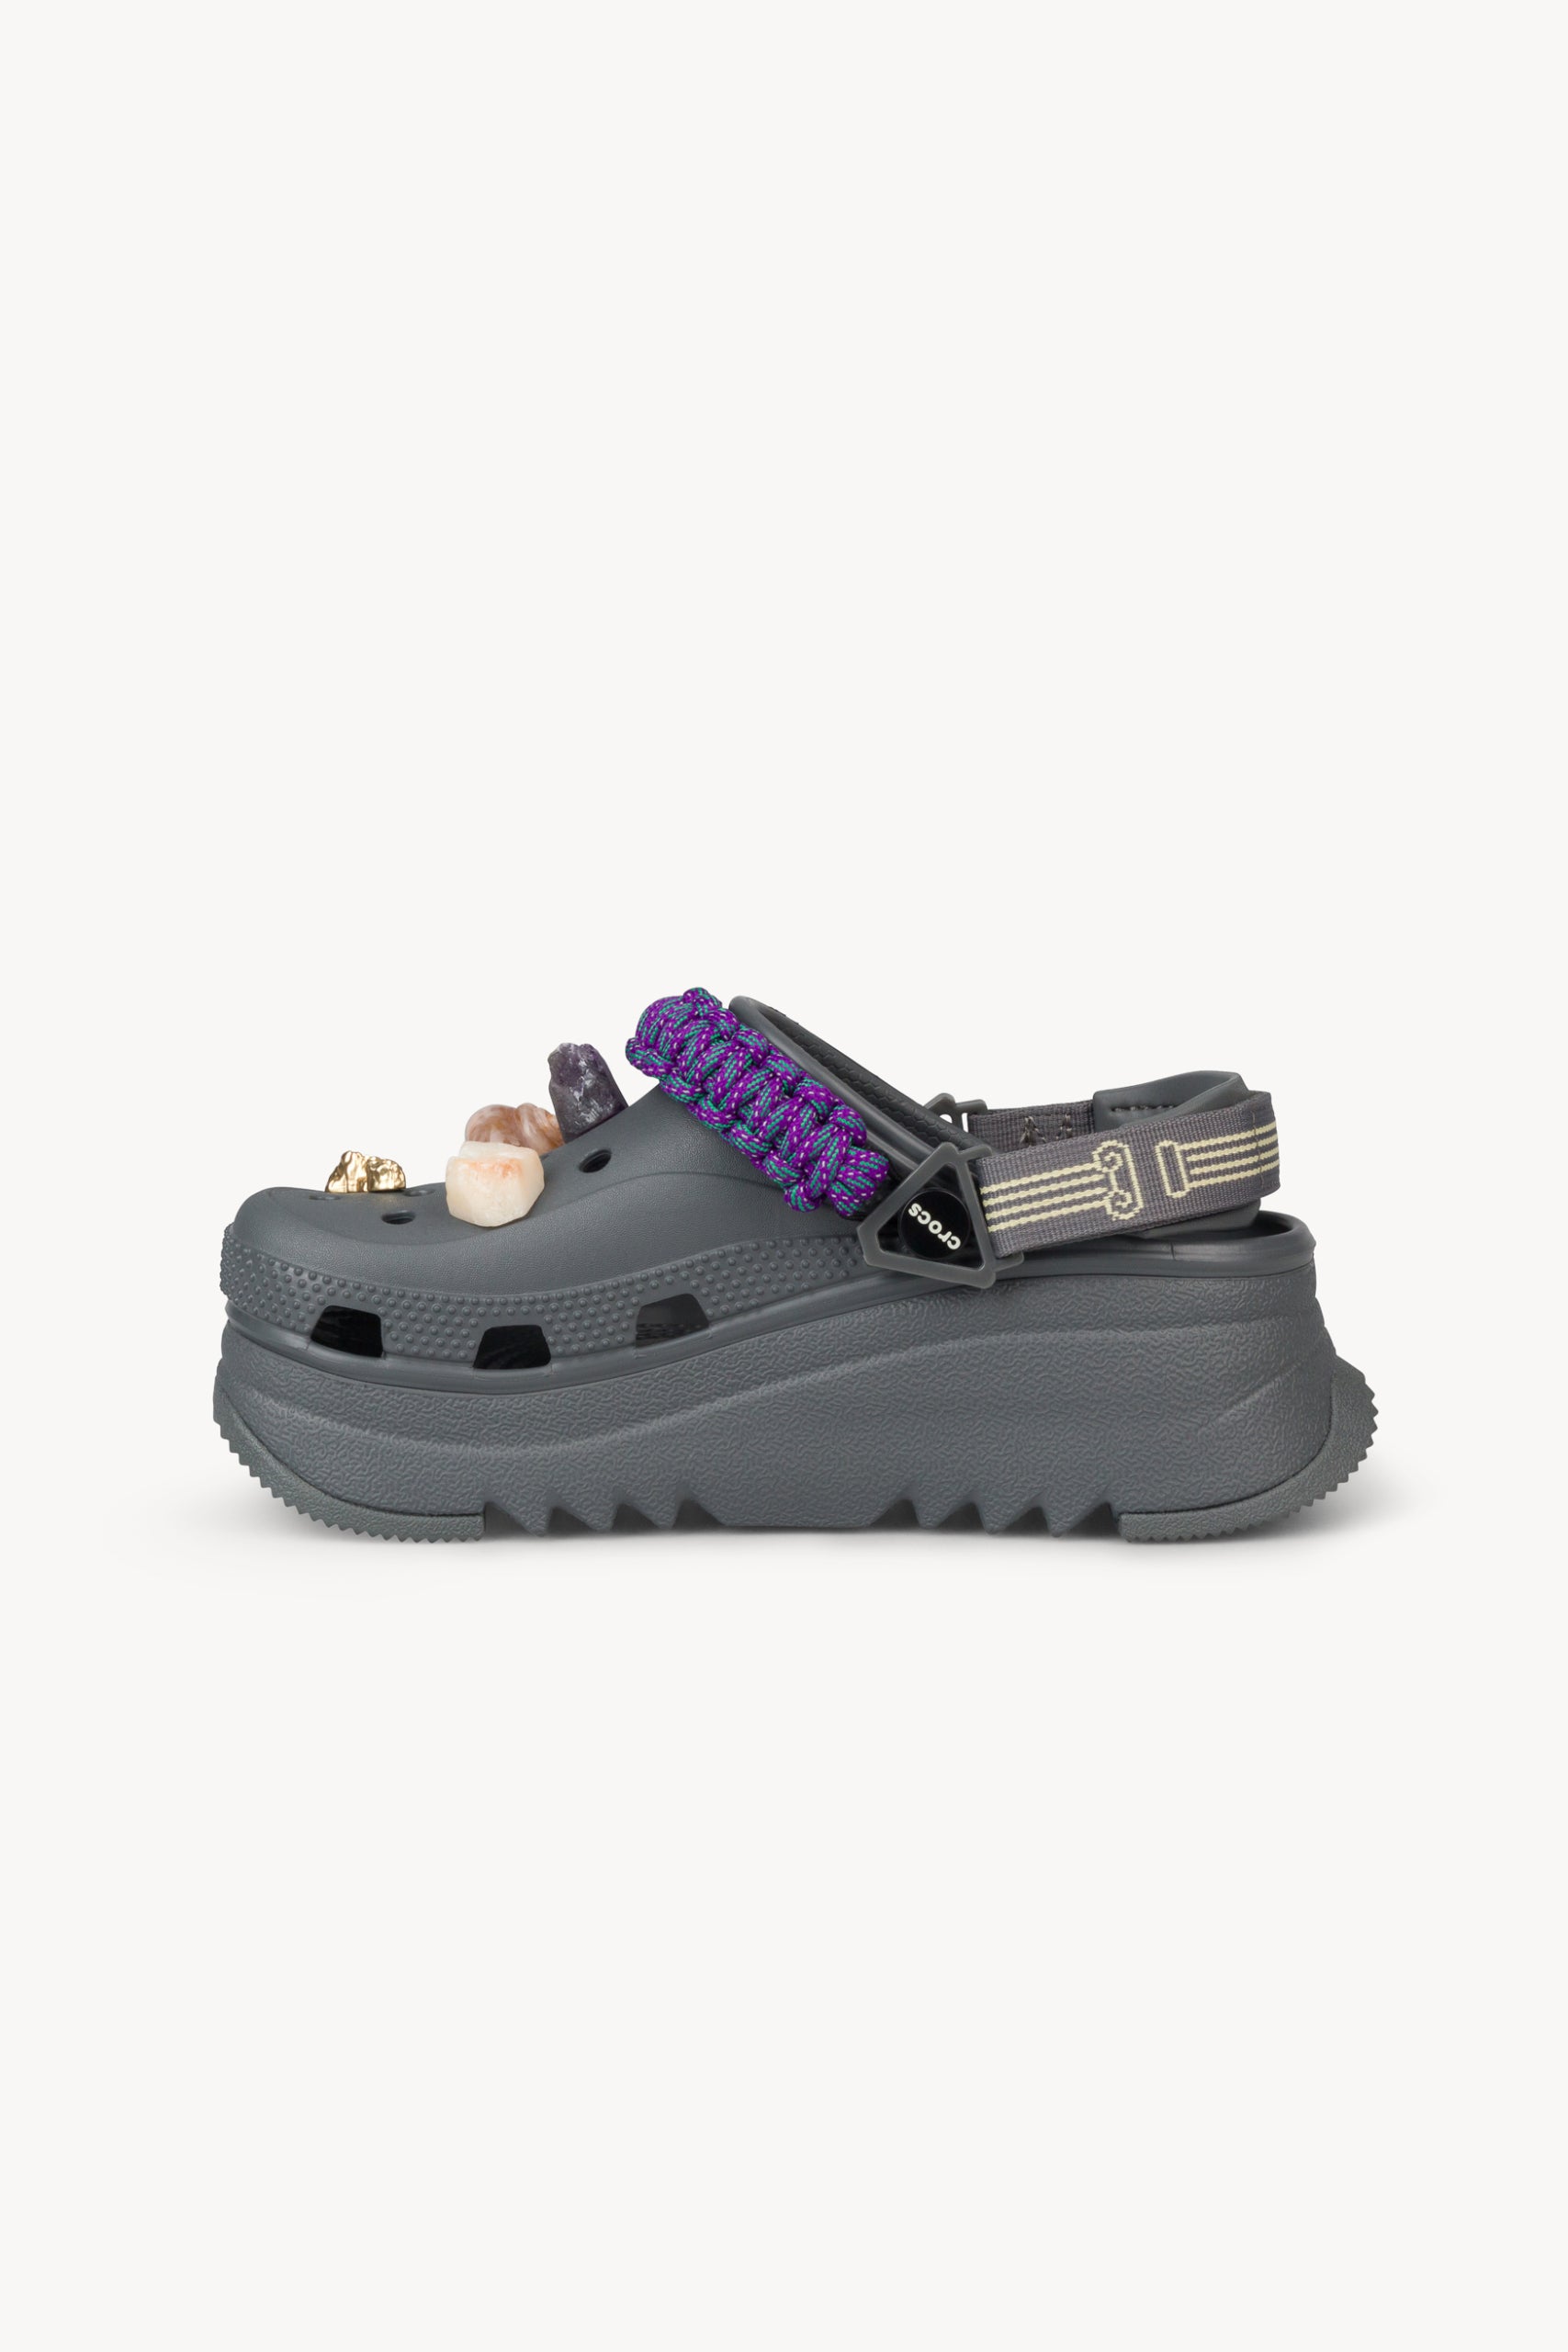 Load image into Gallery viewer, Crocs Hiker Xscape Clog - Slate Grey